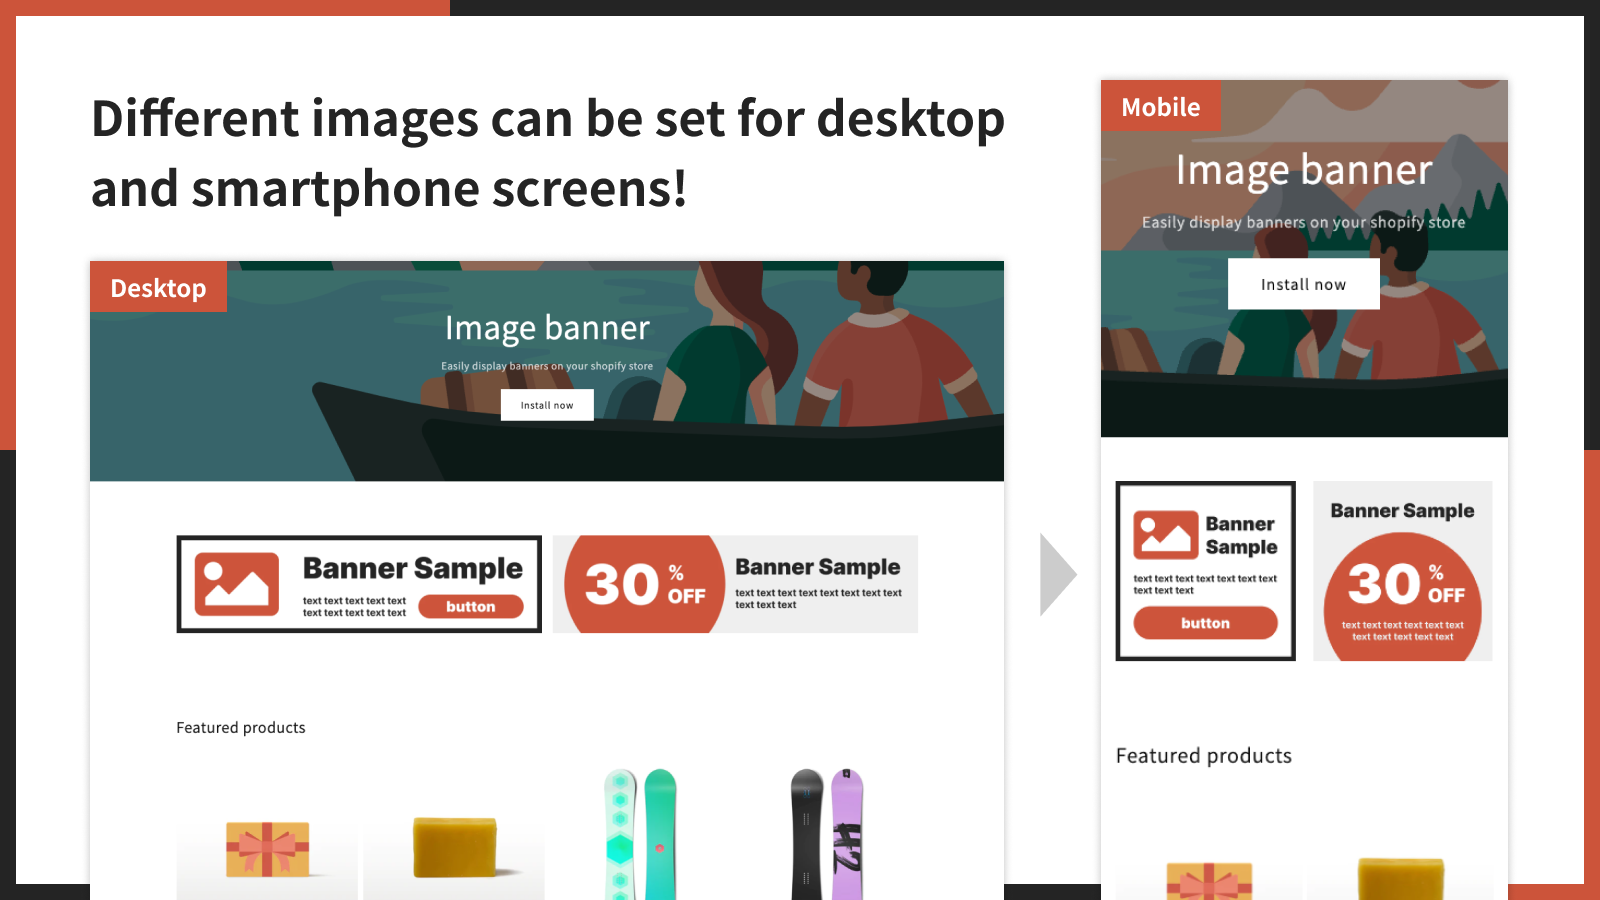 Different images can be set for desktop and smartphone screens!